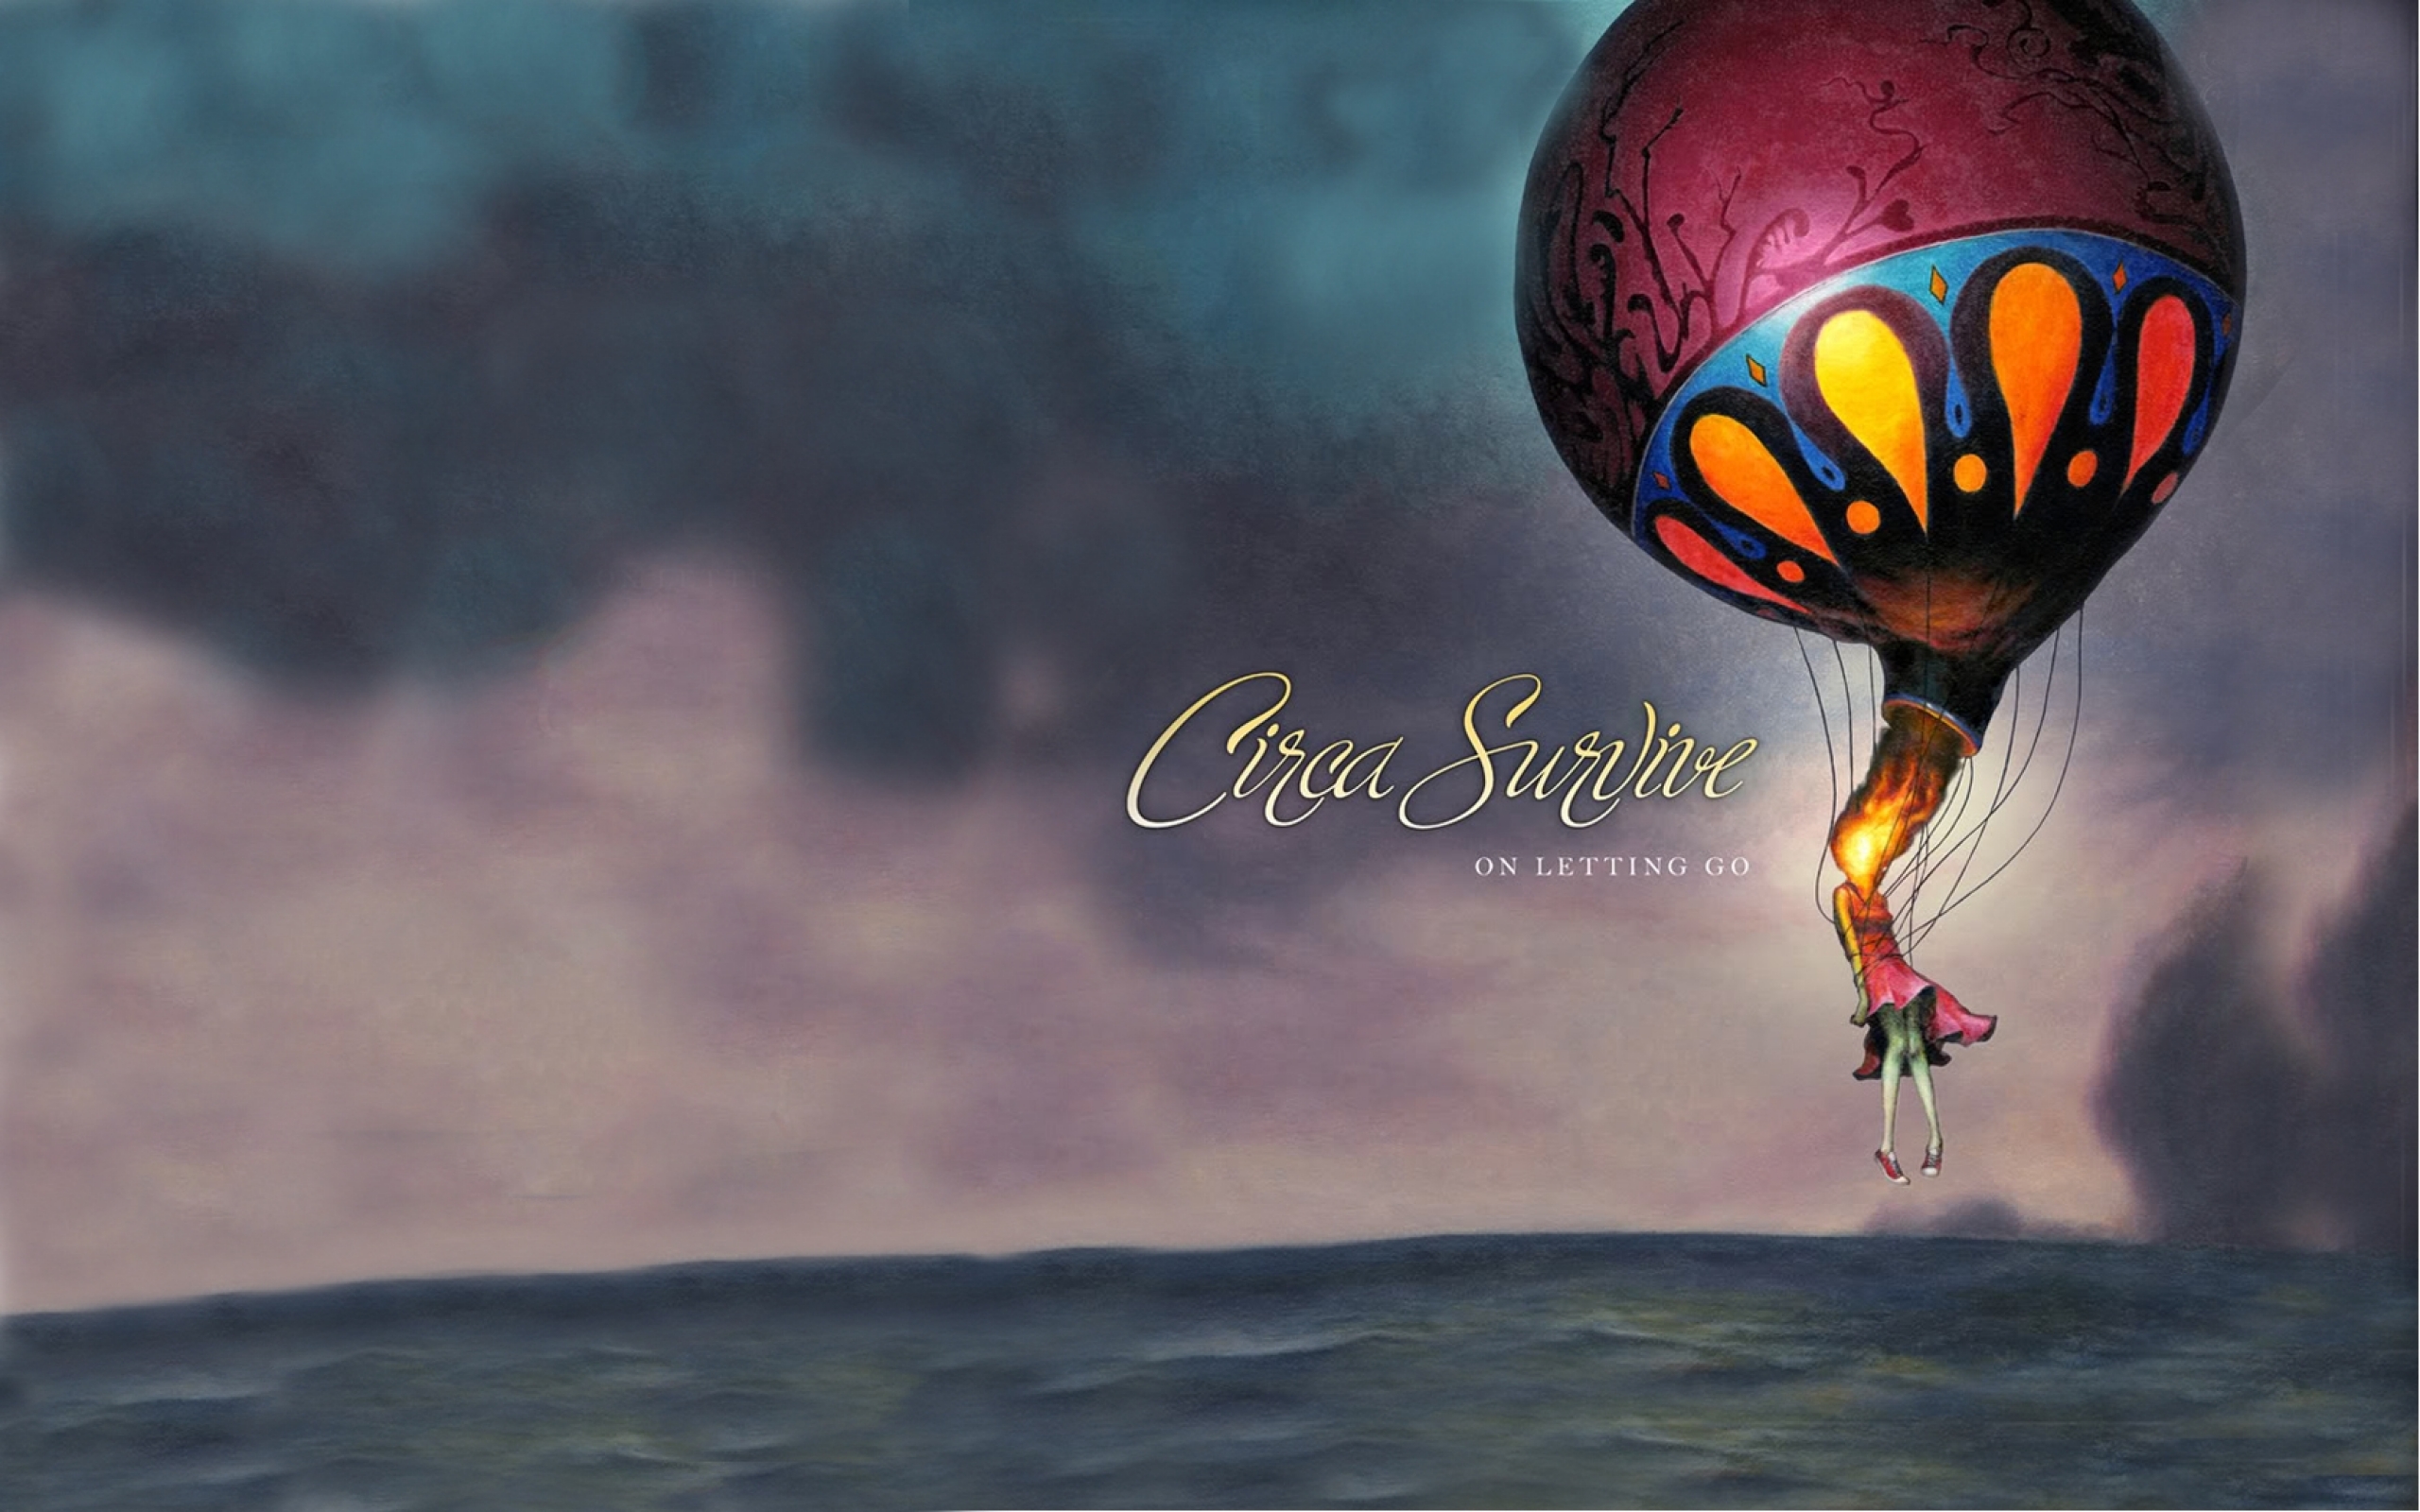 Circa Survive Announce Ten-Year Tour for Iconic Album, On Letting Go